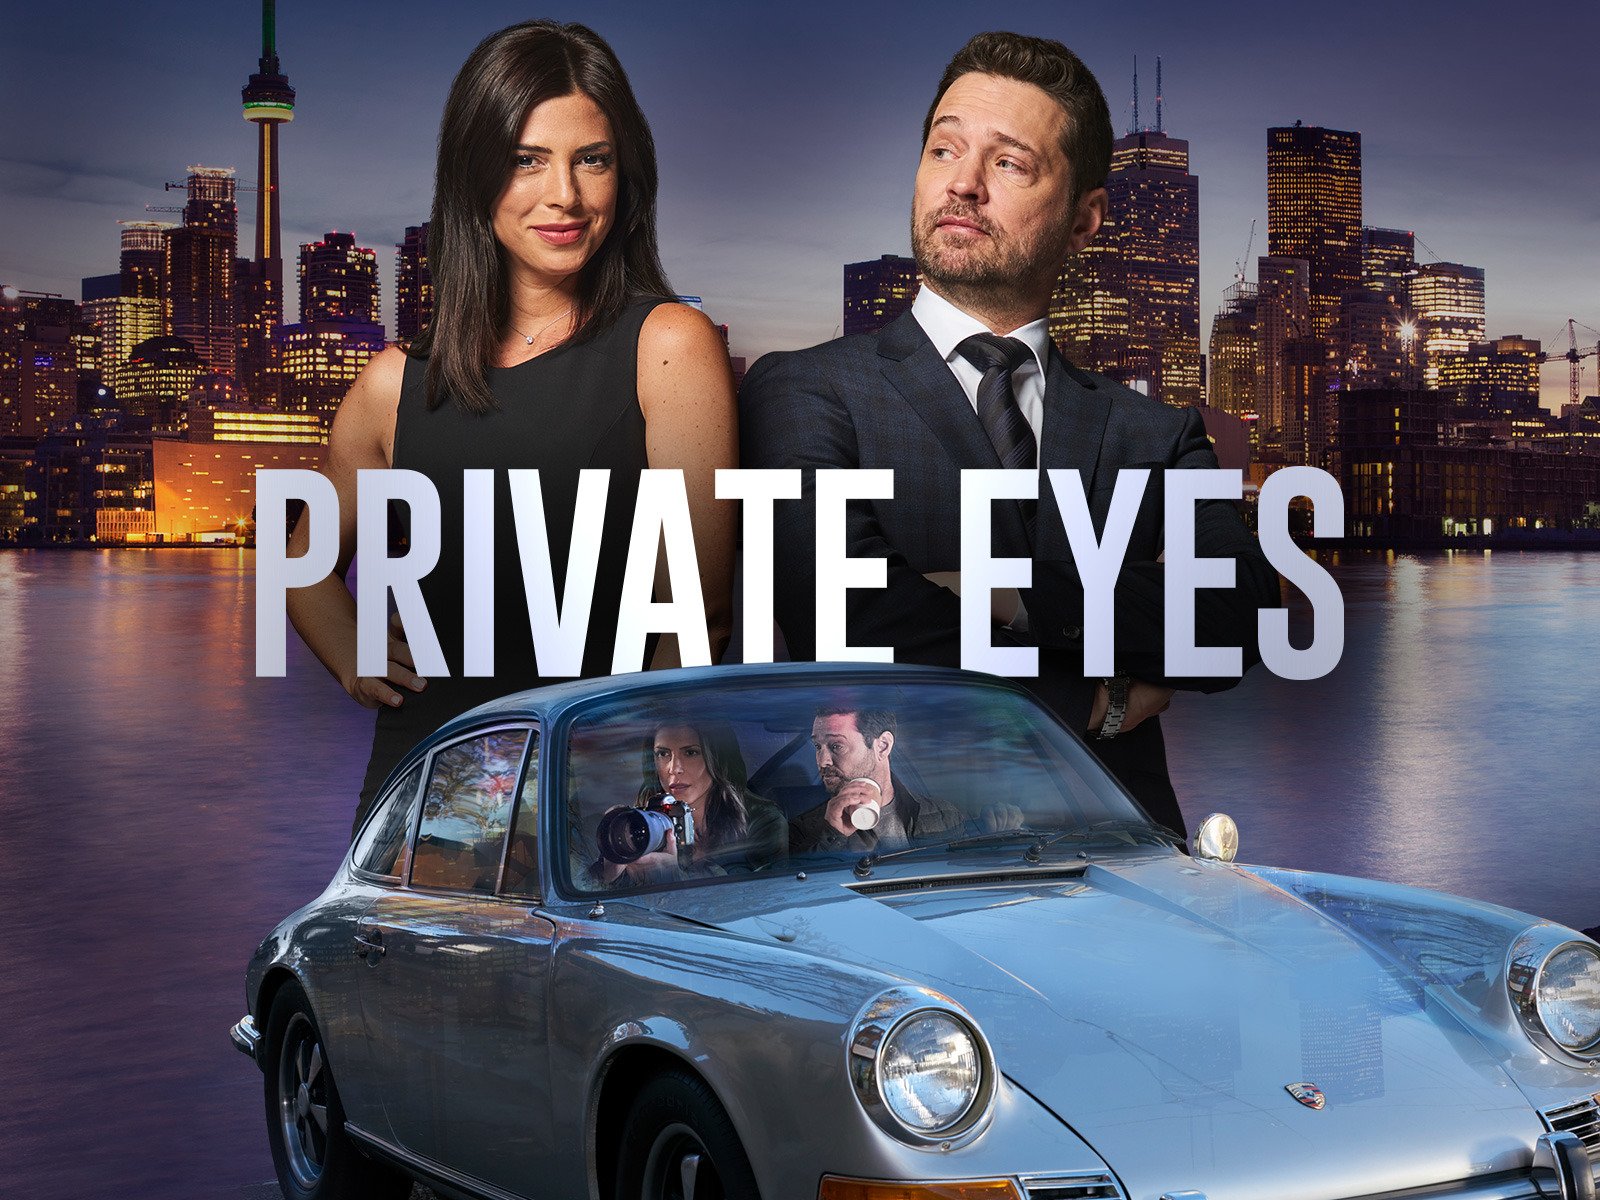 privateeyes review